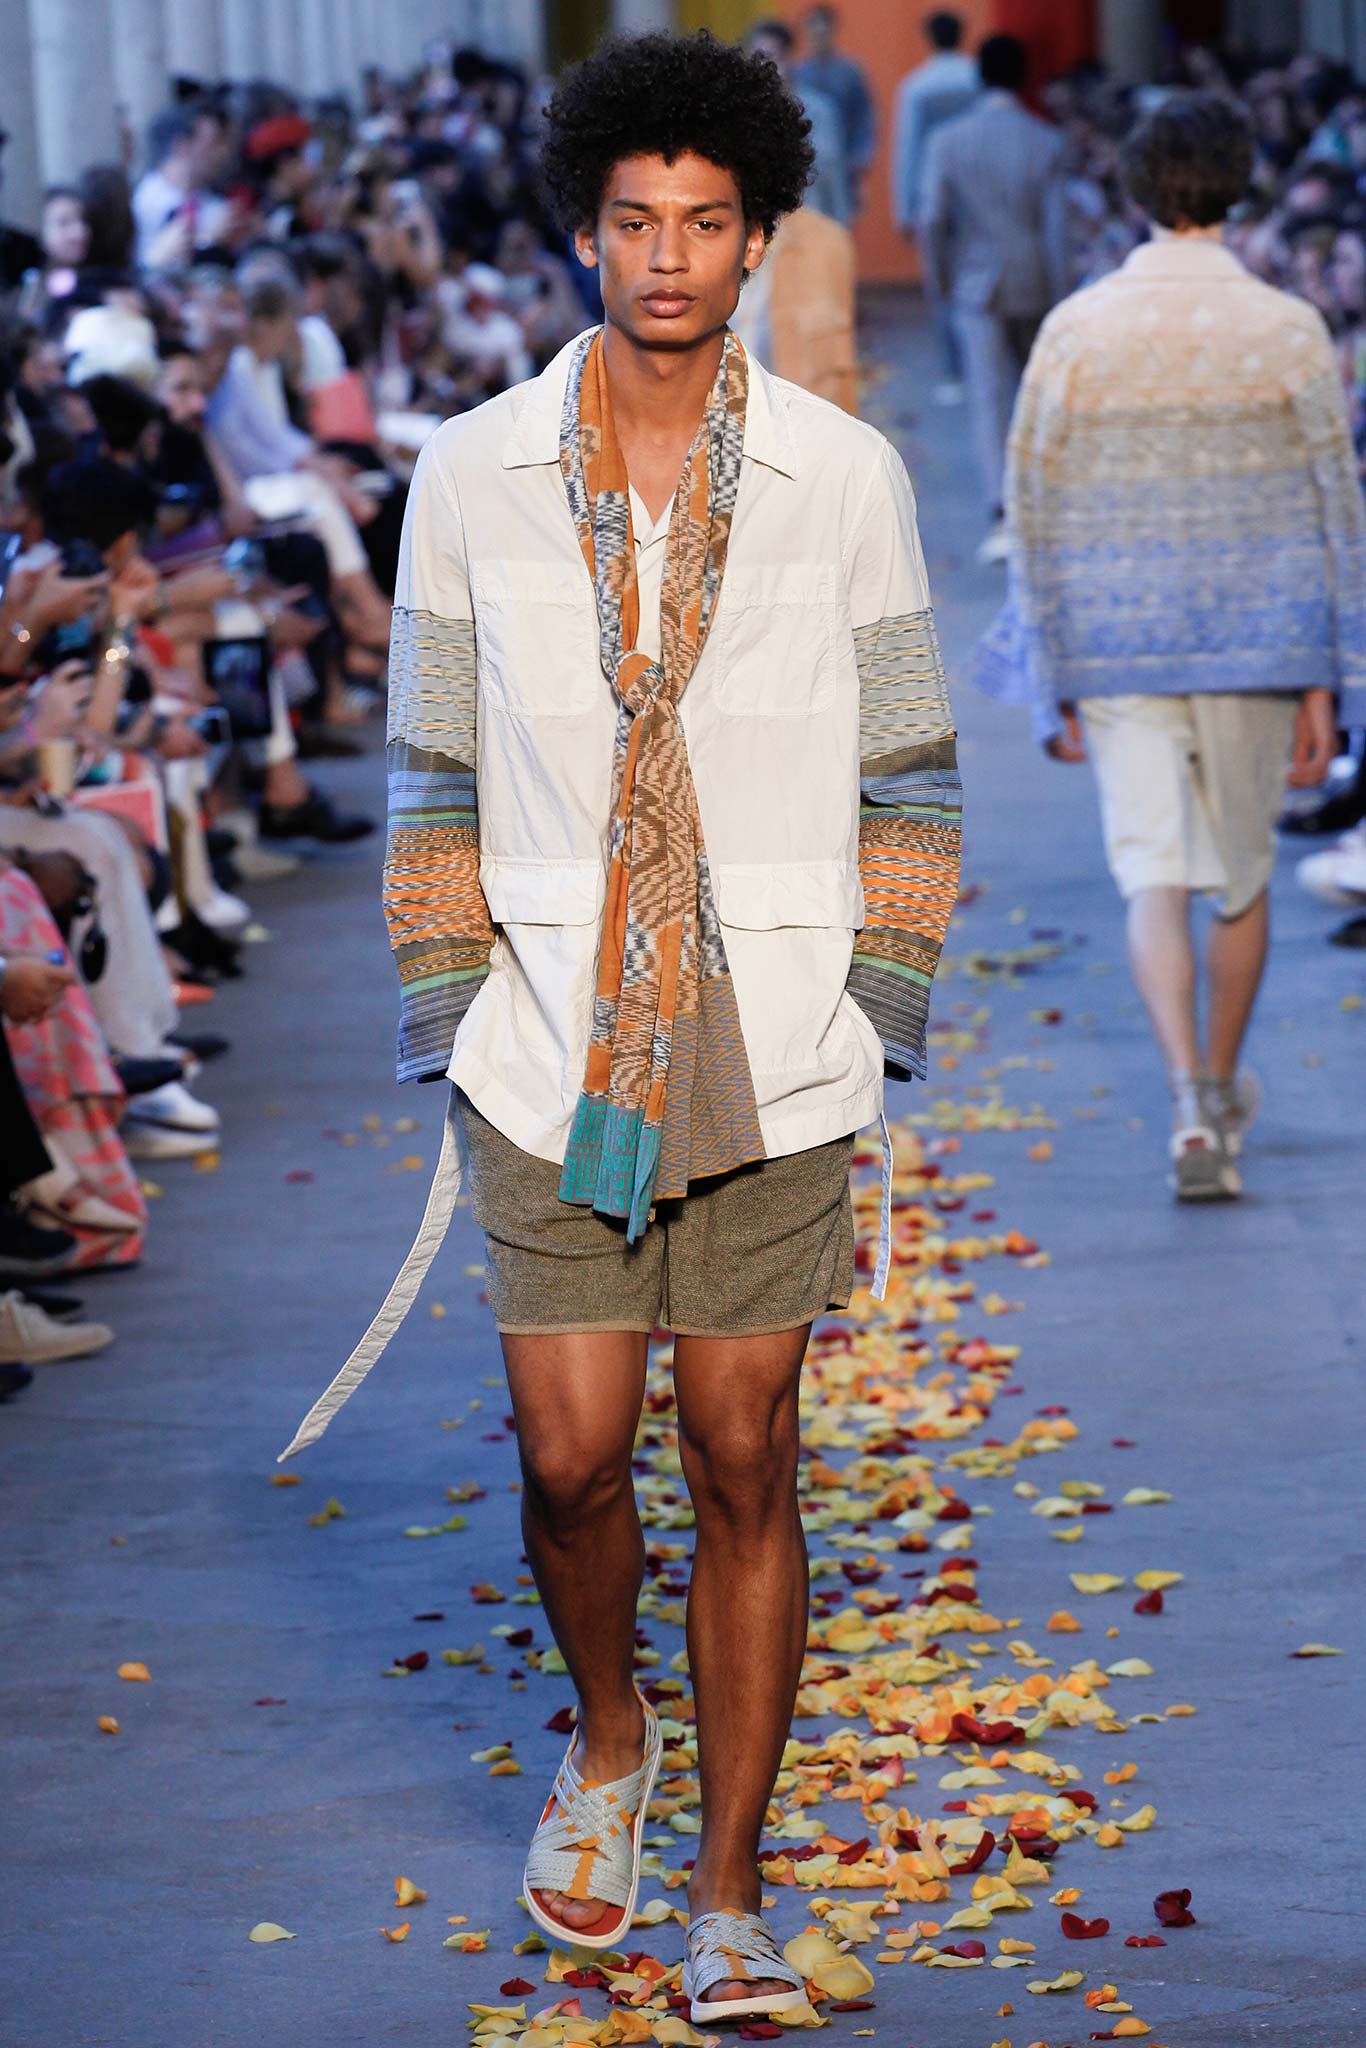 spring-2016-menswear-trends-03a-long-scarves-01